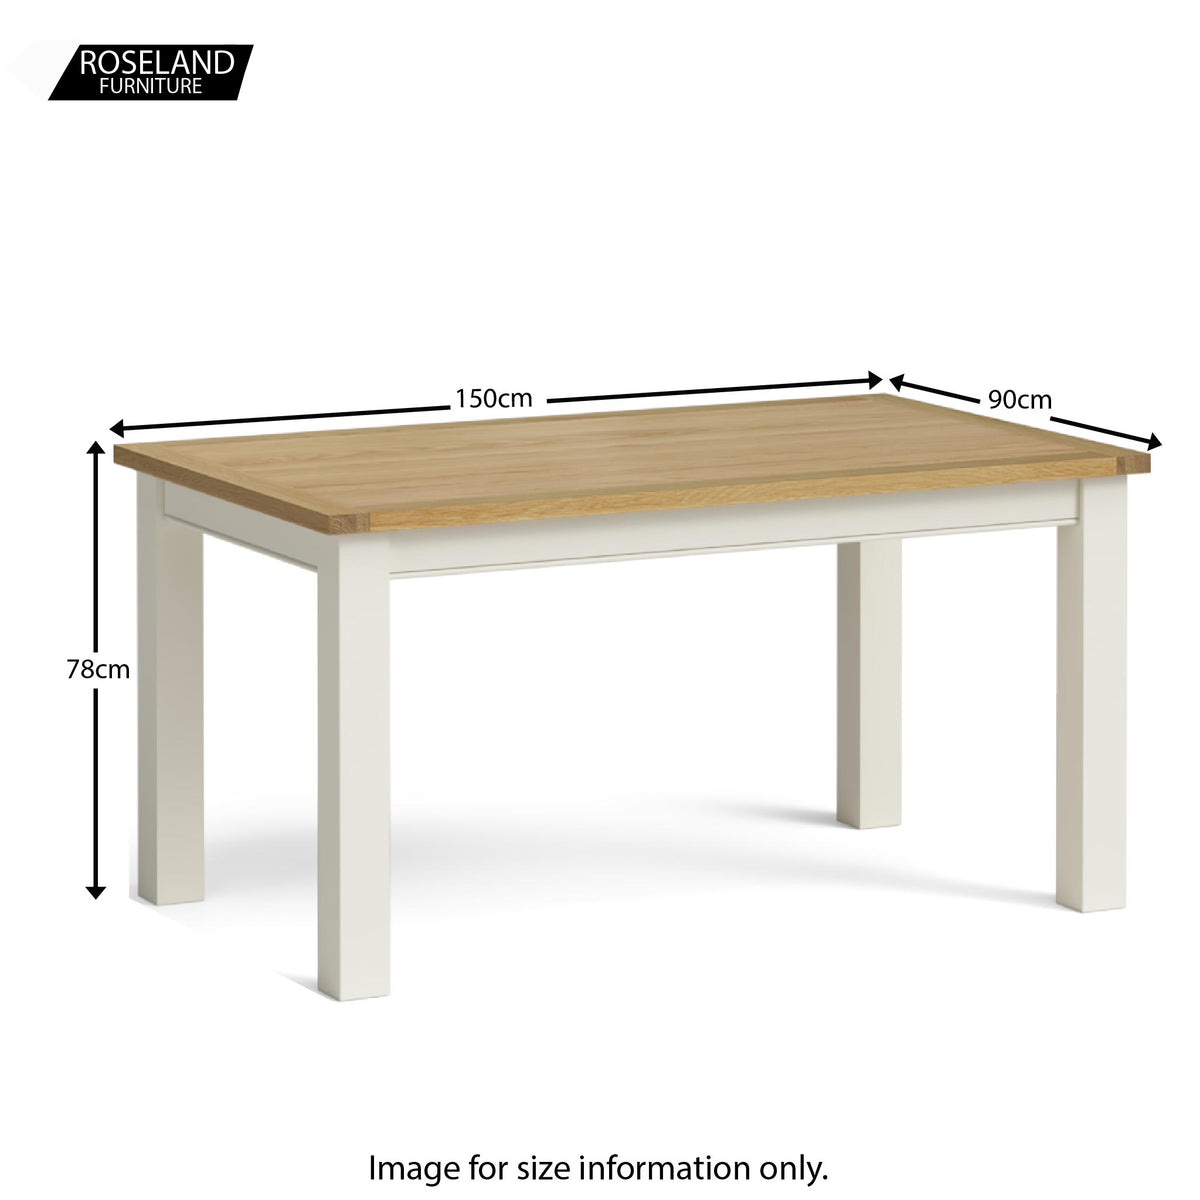 Chichester 150cm Dining Table - Size Guide